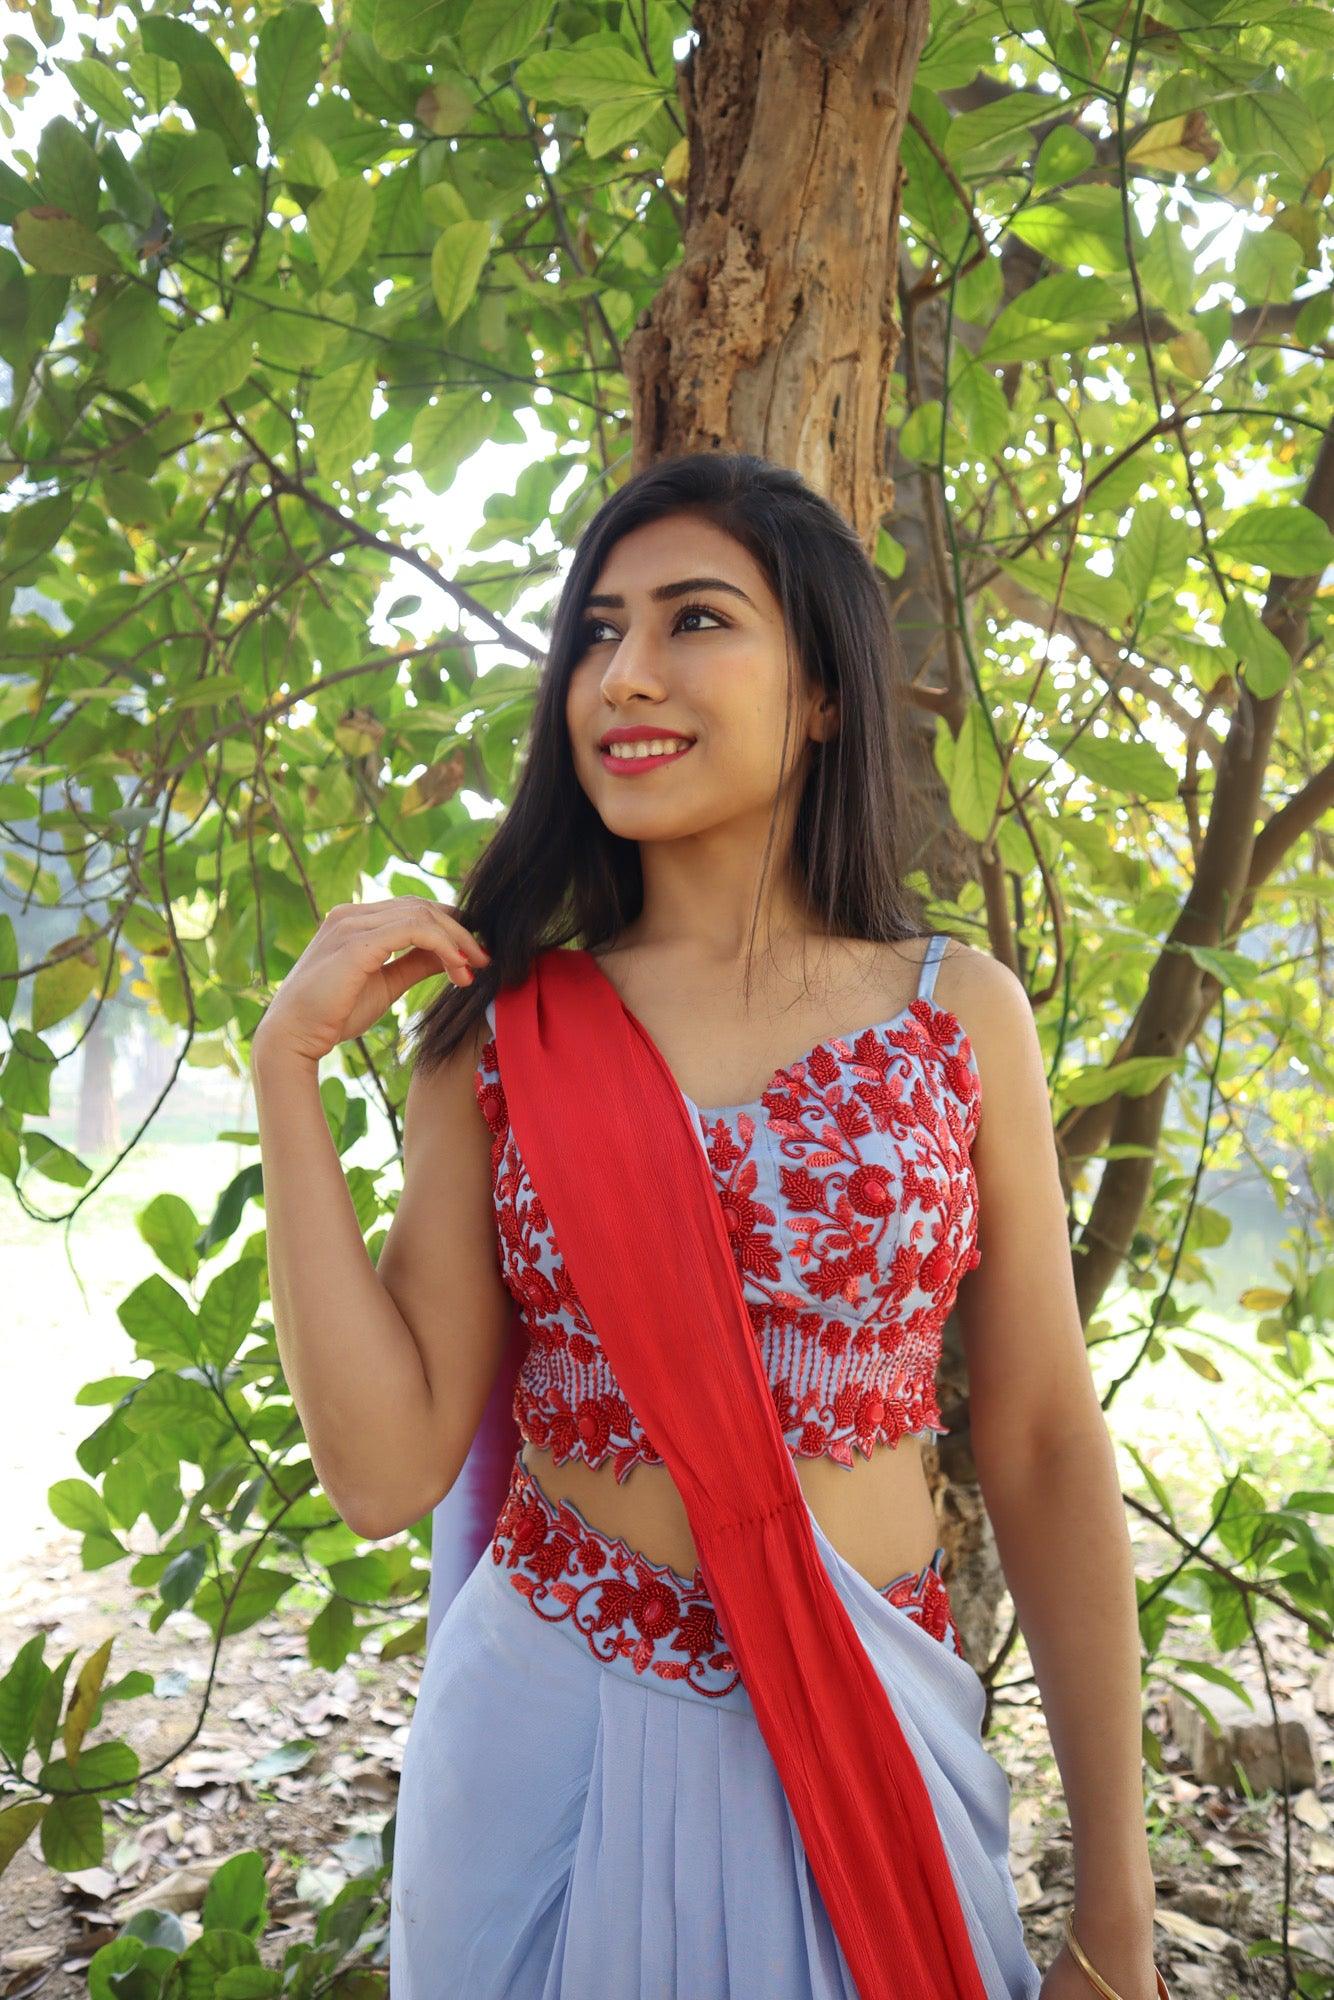 Powder blue and red draped saree skirt with blouse – Nishi Madaan